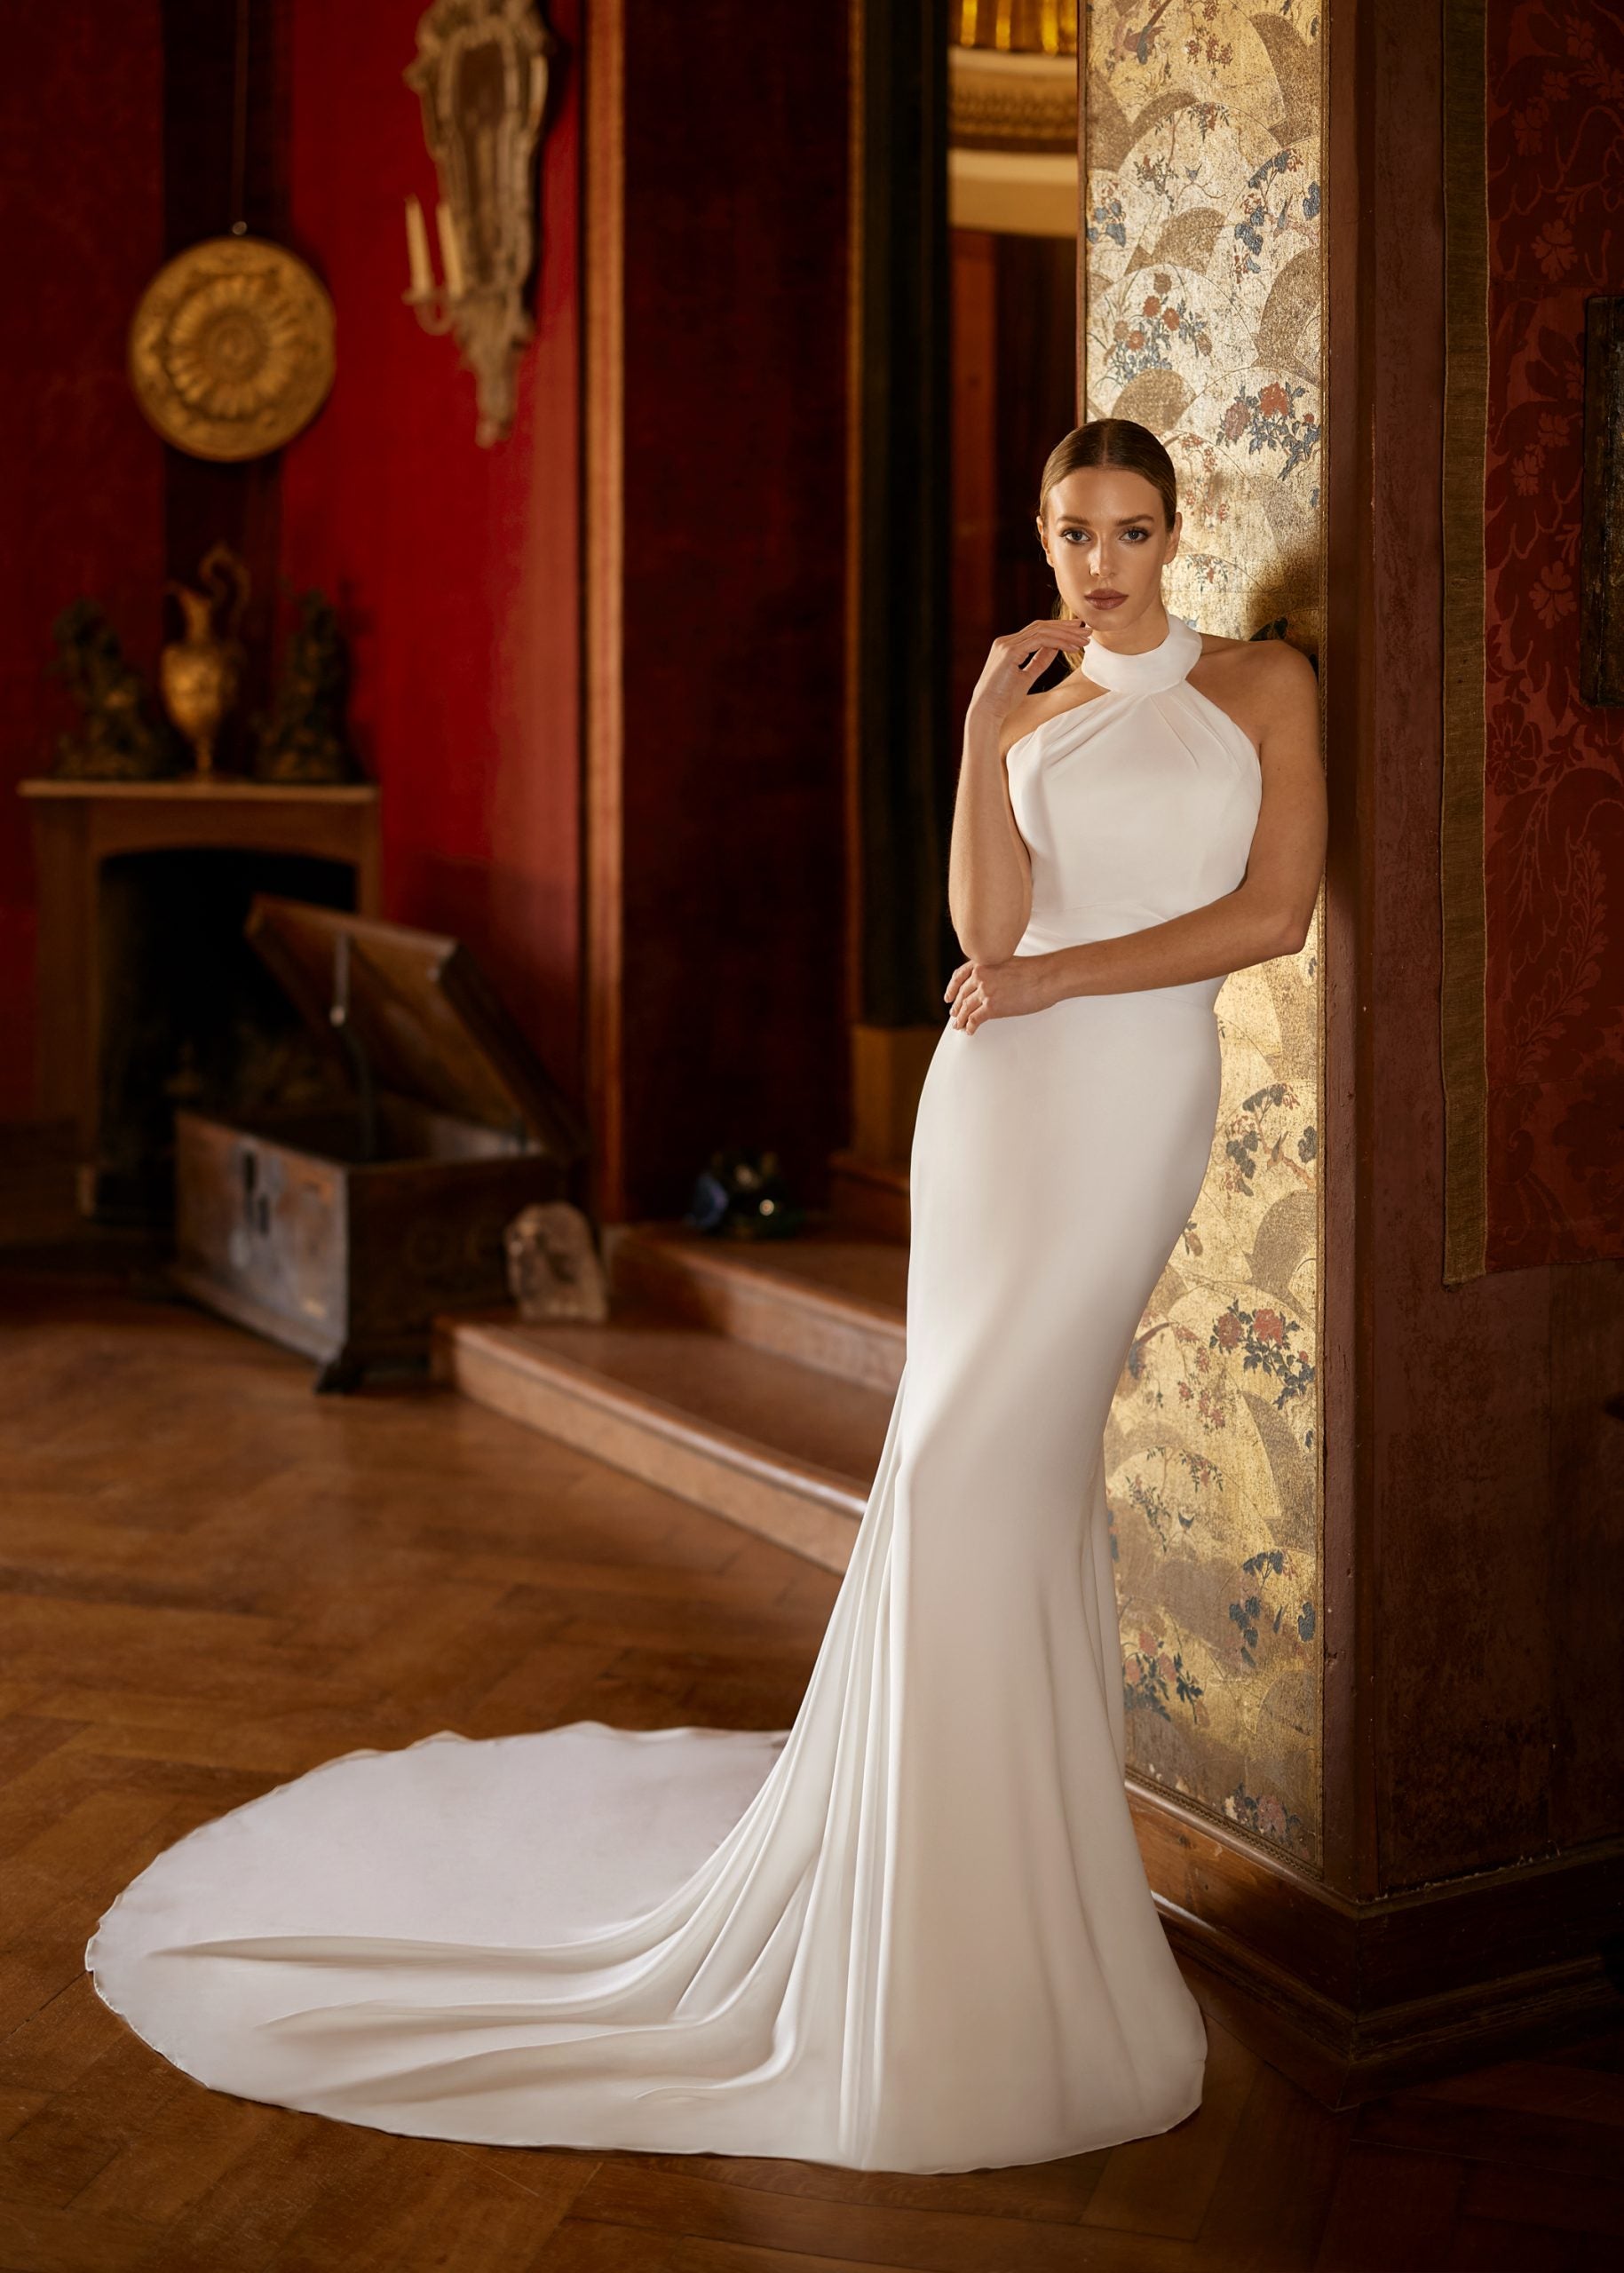 Simple Halter-Neck Gown With Bow by Randy Fenoli - Image 1